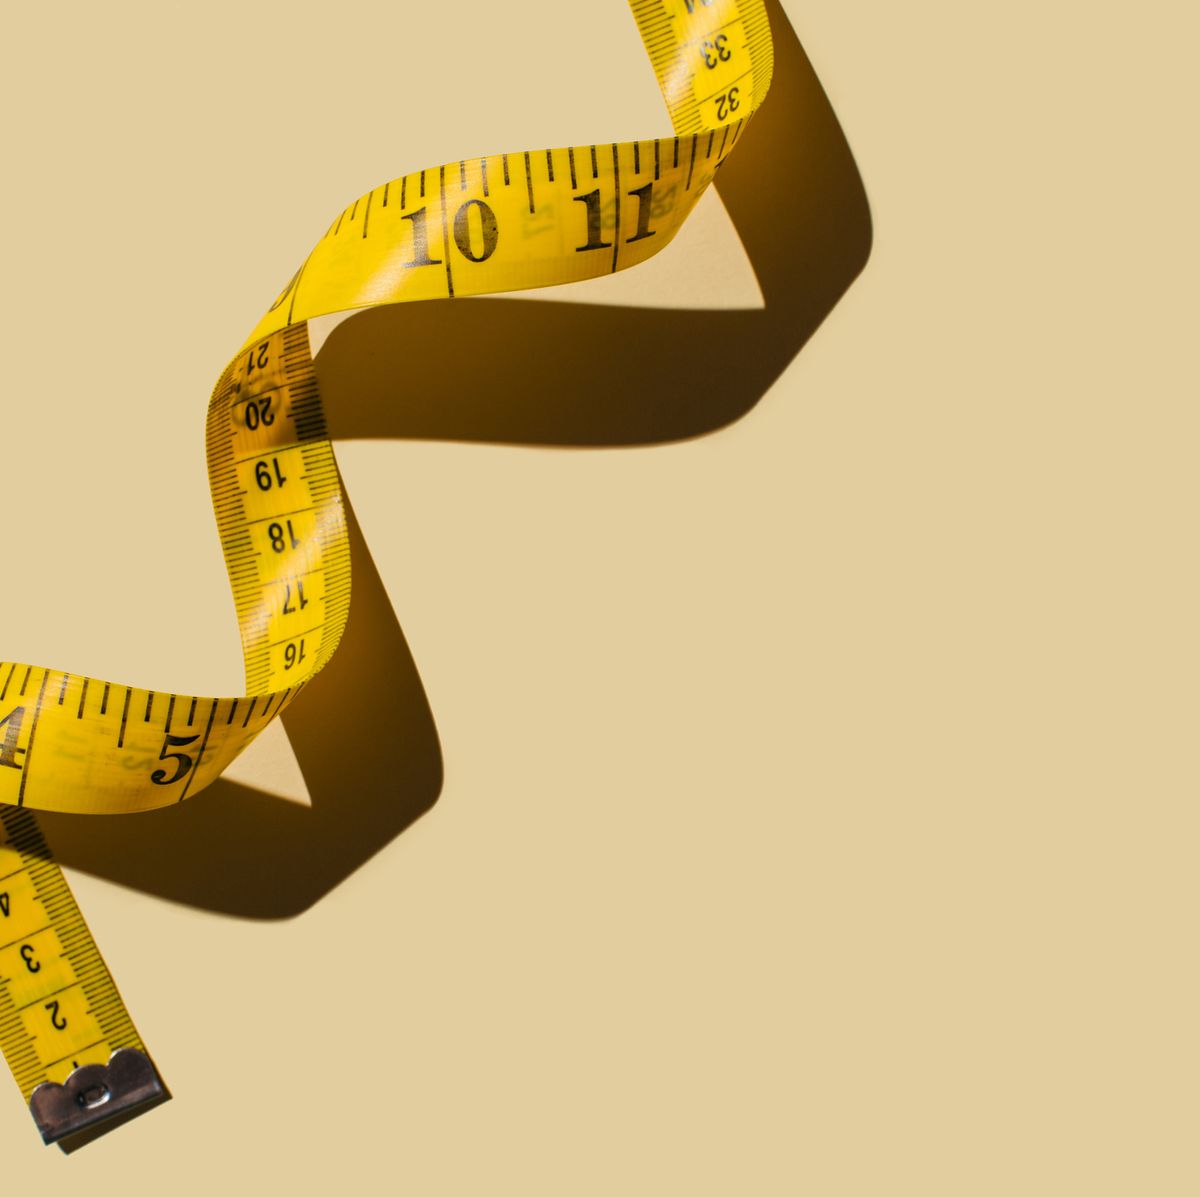 All about reading the tape measure - SewGuide